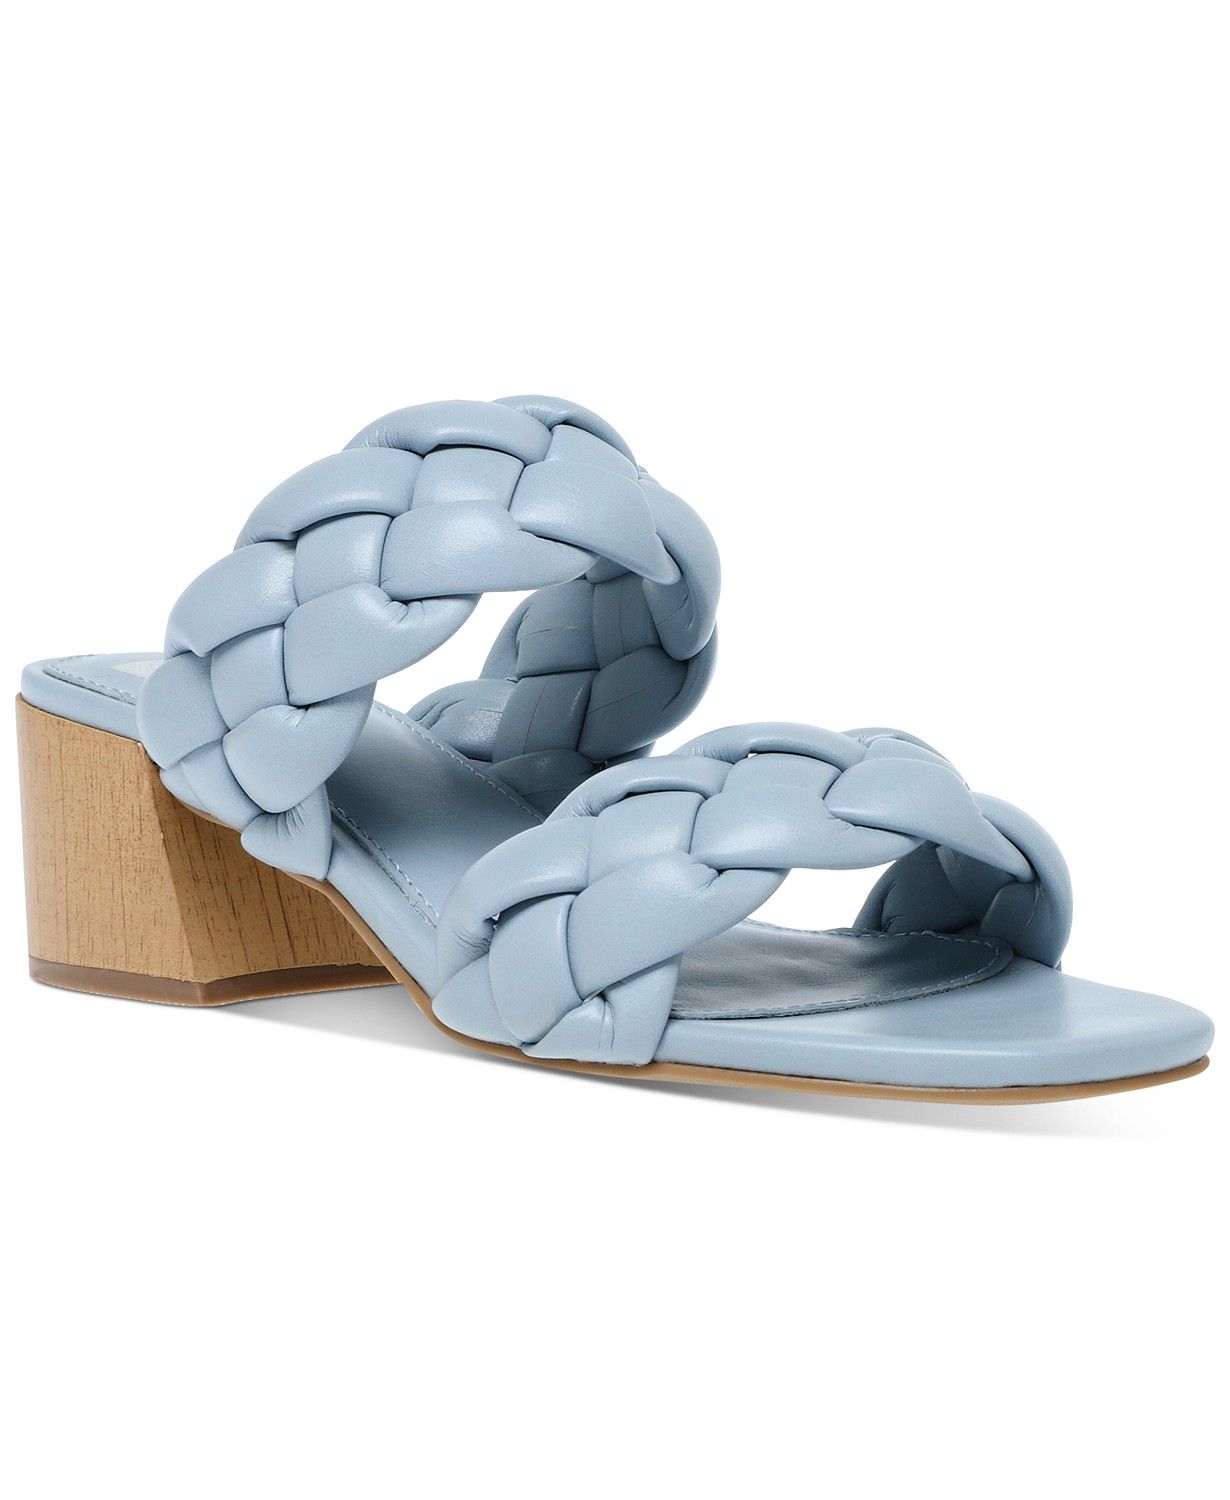 DV Dolce Vita Stacey Plush Braided Sandals & Reviews - Sandals - Shoes - Macy's | Macys (US)